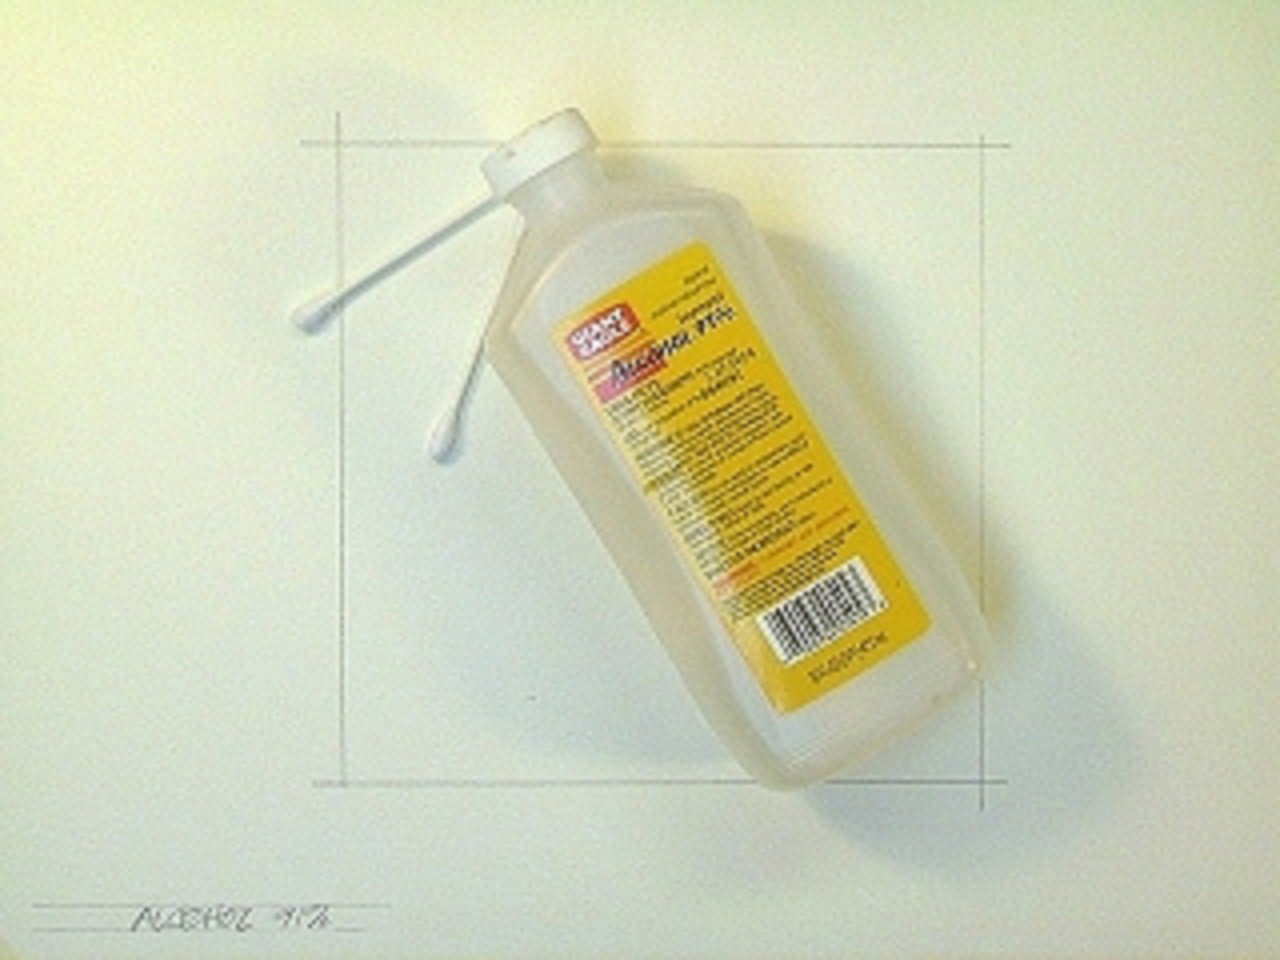 Dropping alcohol for texture on watercolor paintings